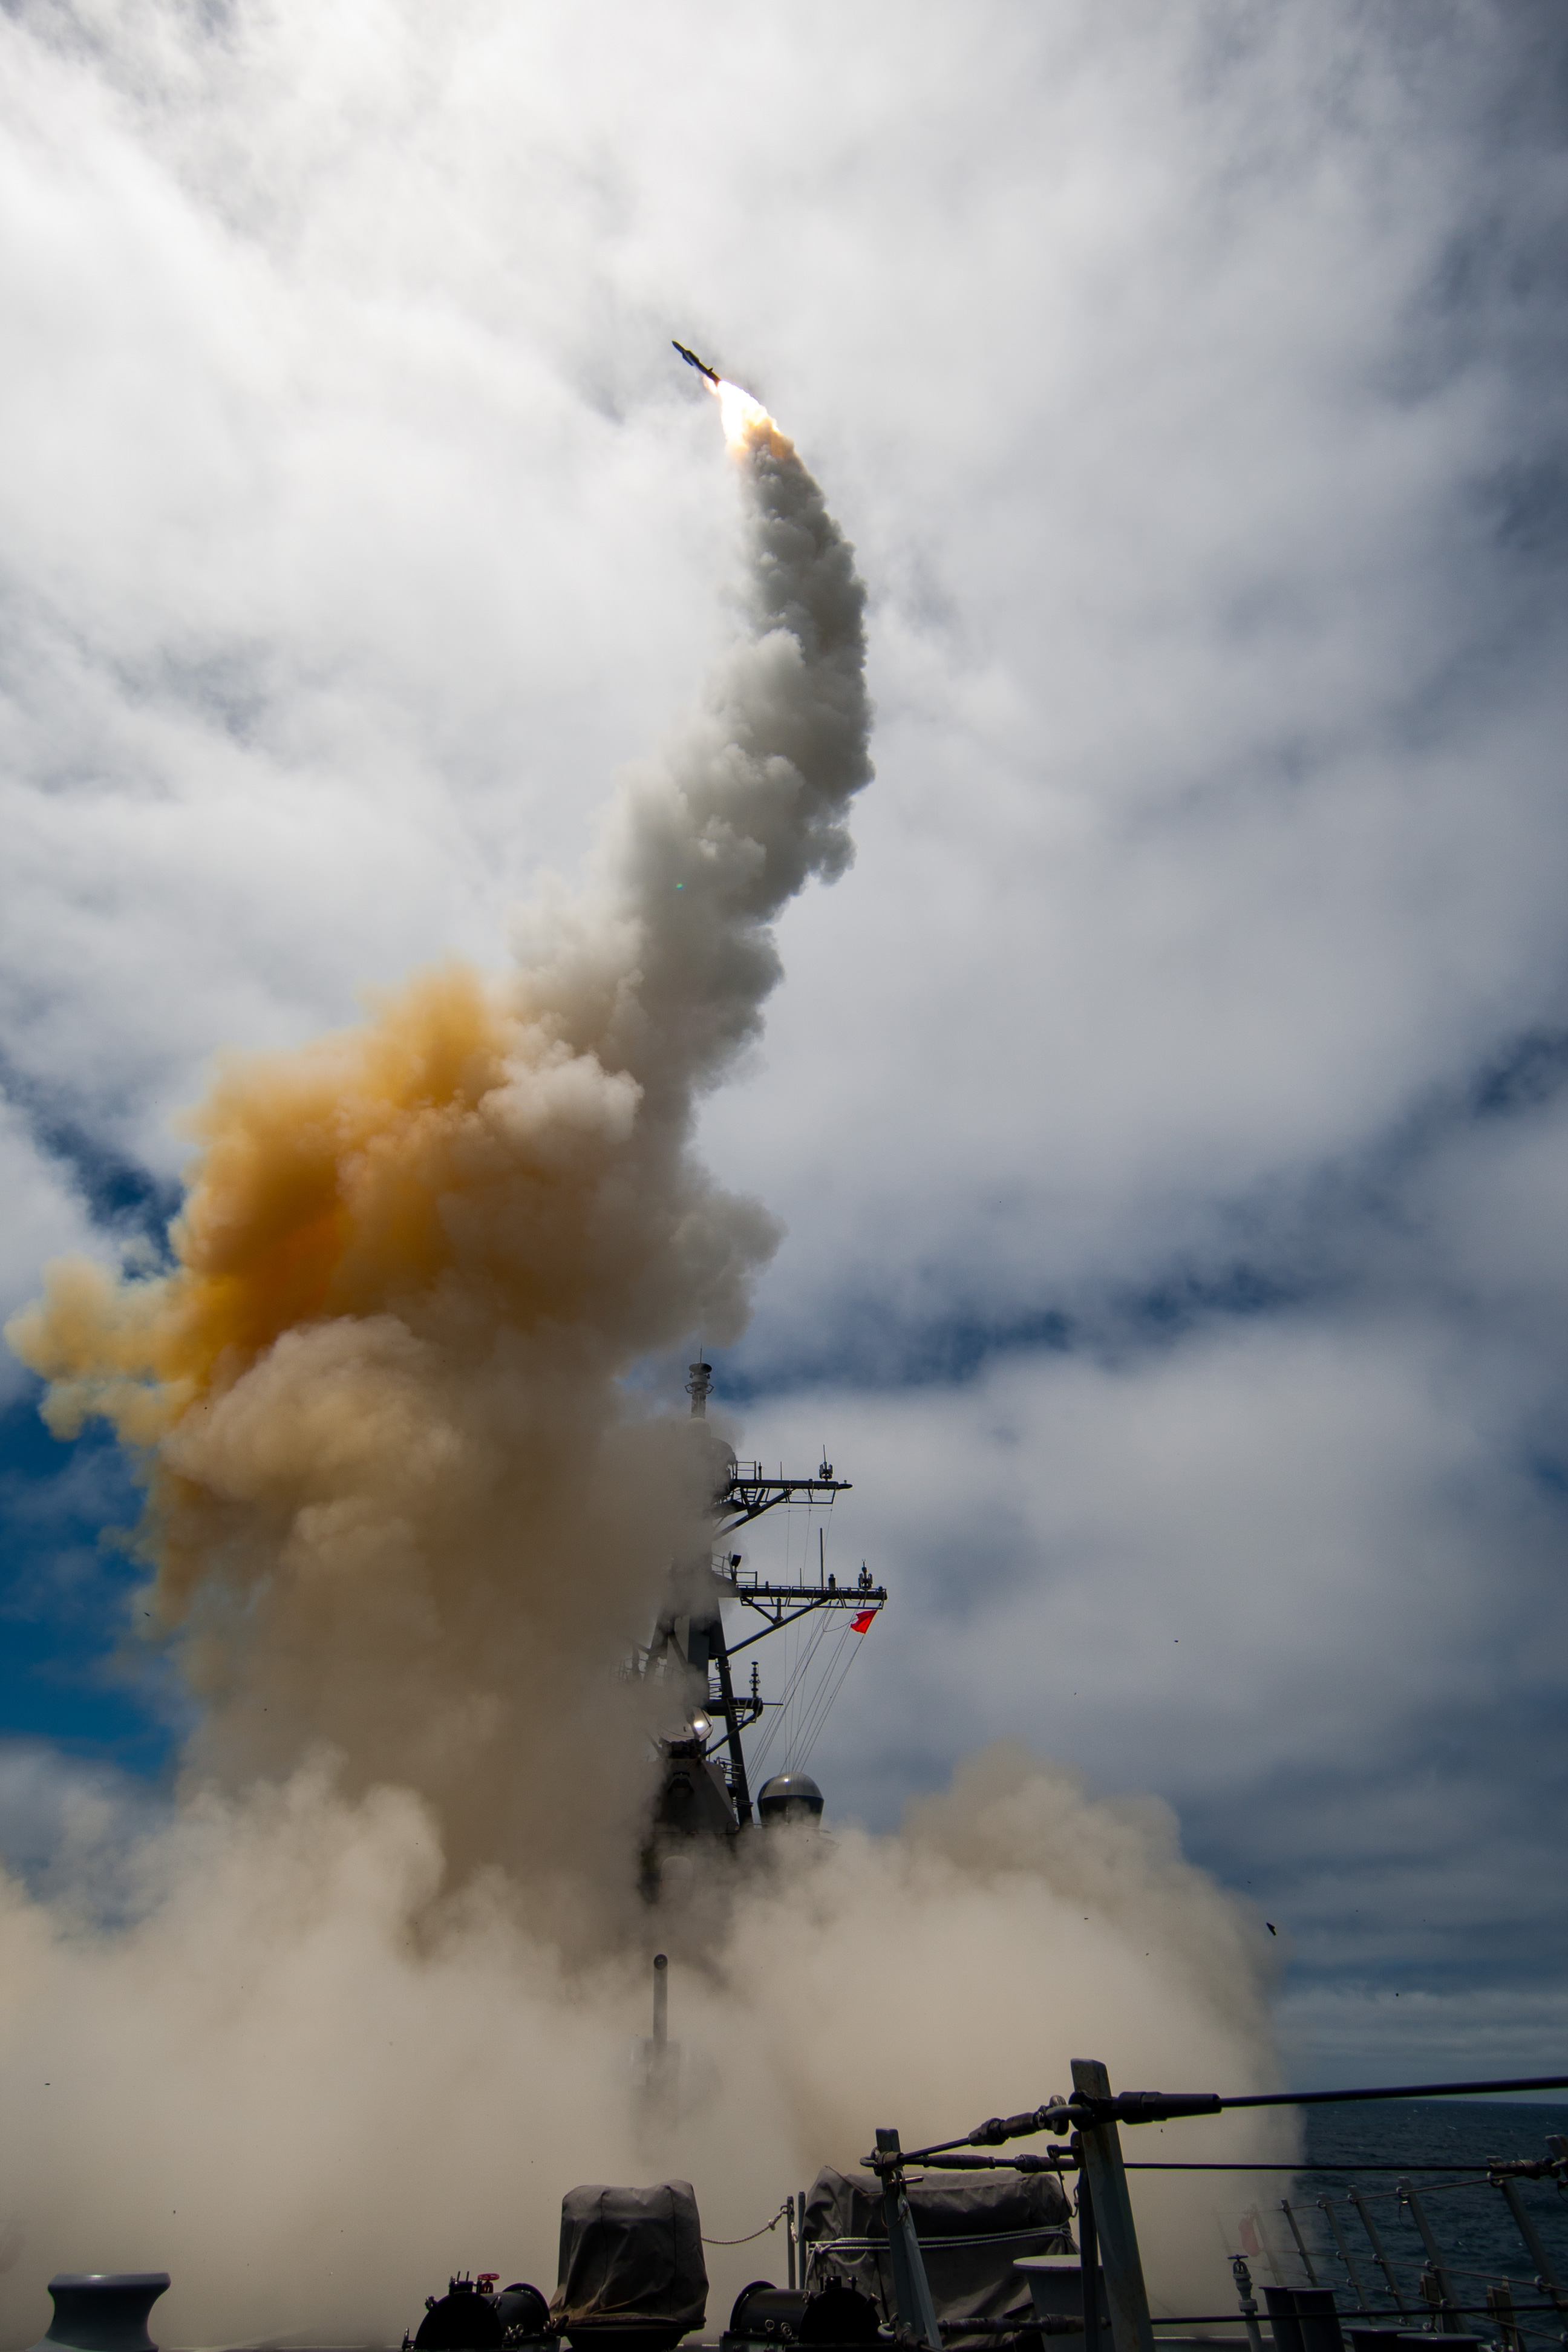 The Arleigh-Burke class guided-missile destroyer USS John Paul Jones (DDG 53) launches a Standard Missile-6 (SM-6) during a live-fire test of the ship's aegis weapons system on June 19, 2014. US Navy photo.